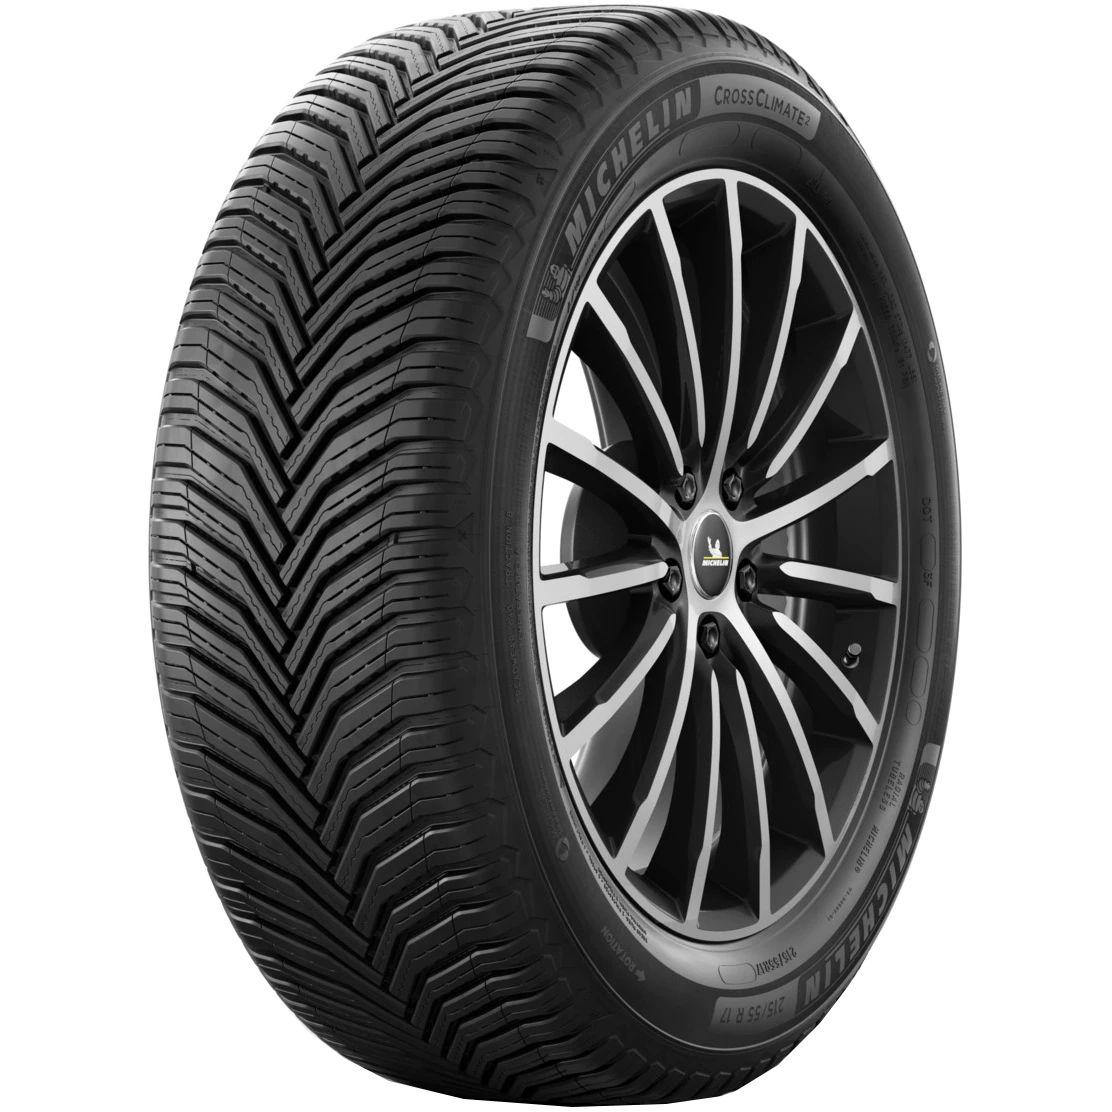 Anvelope all seasons MICHELIN CrossClimate2 M+S XL 215/55 R16 97V